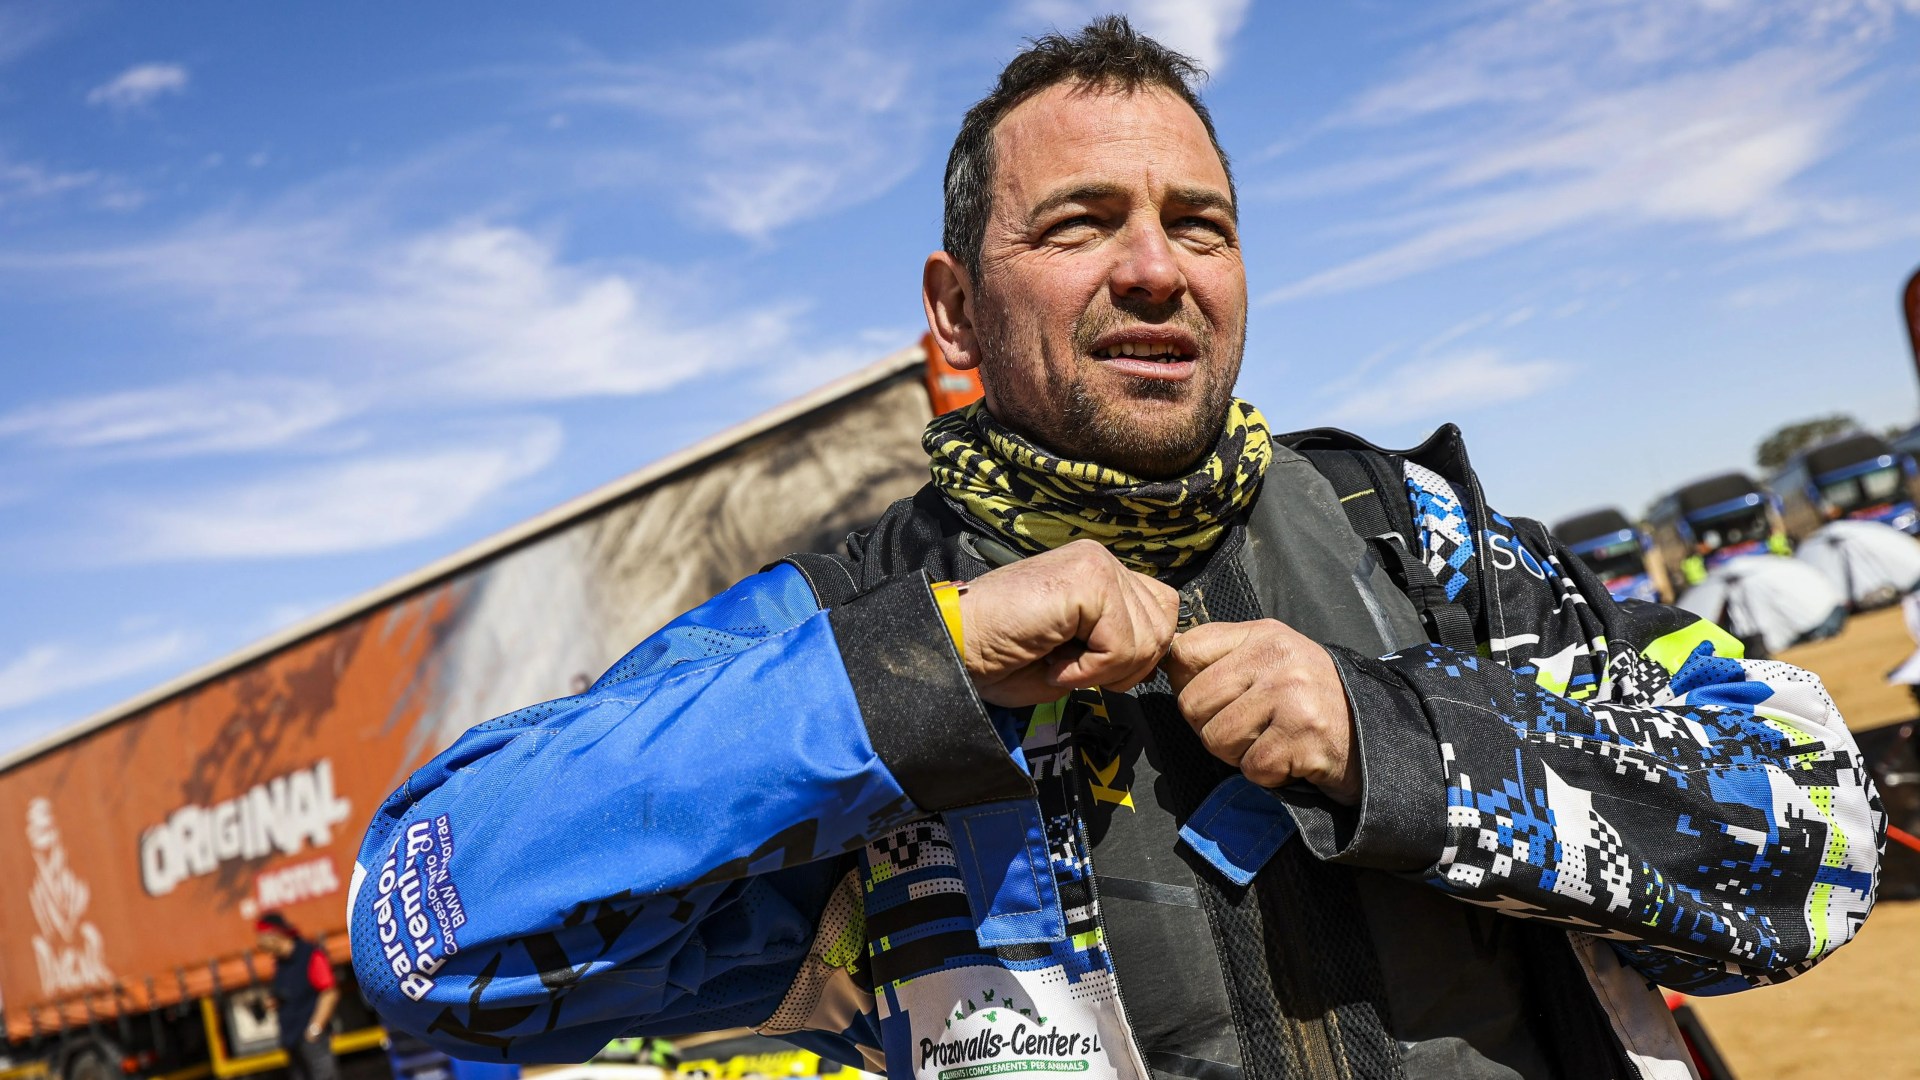 Carles Falcon dead aged 45: Spanish motorcyclist passes away after suffering horror crash during Dakar Rally